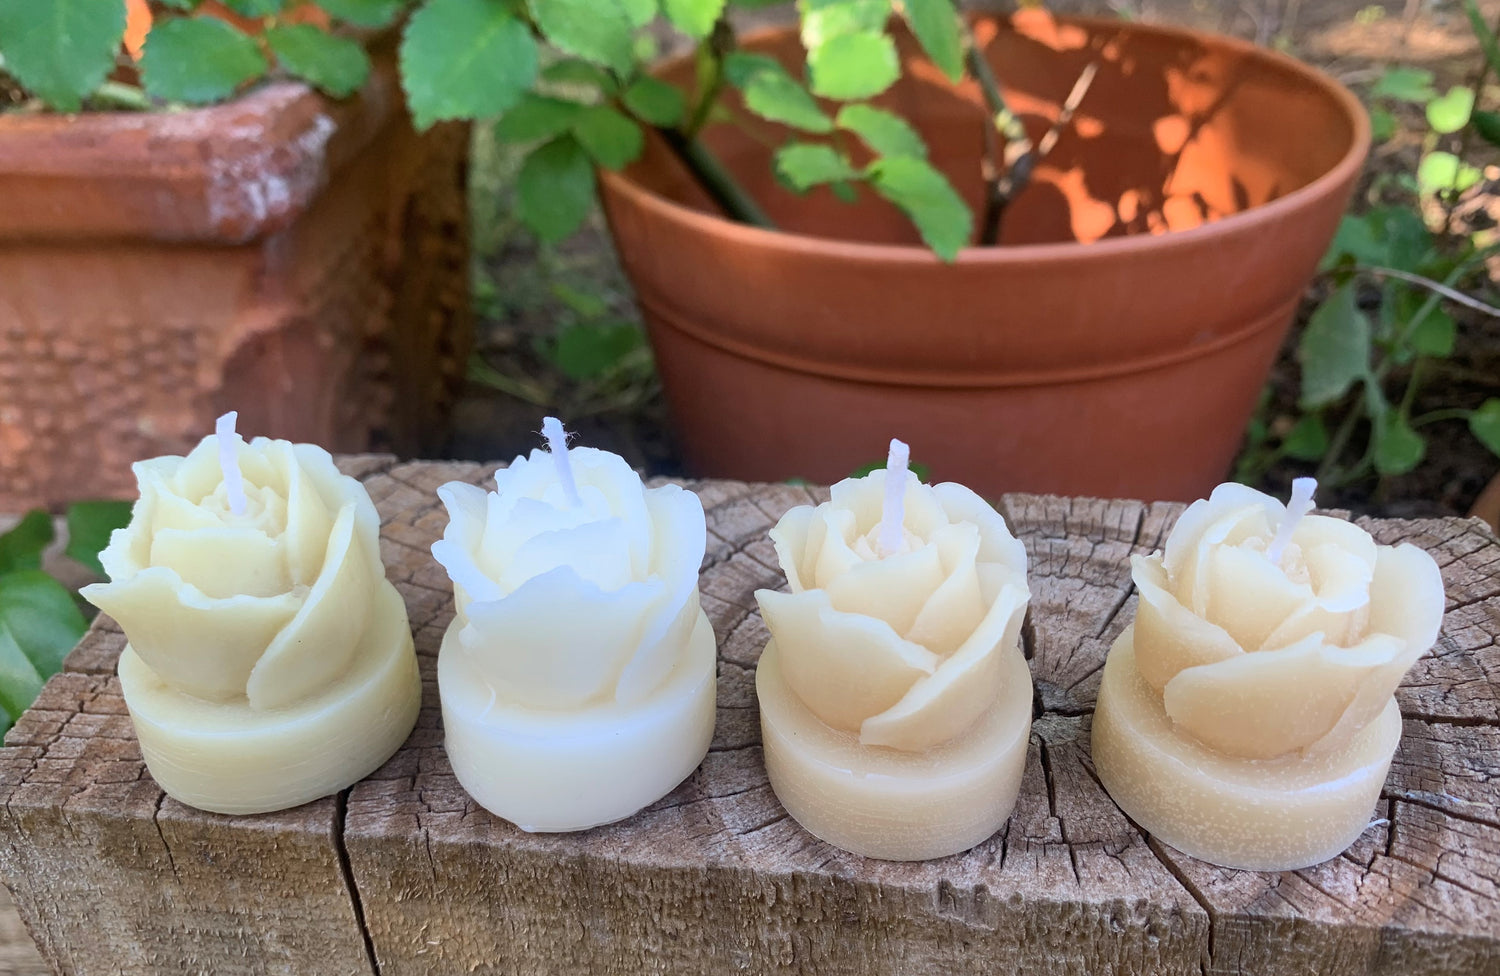 Beeswax Petite Rosebud Votive Candles - hand poured, one at a time - Set of 4